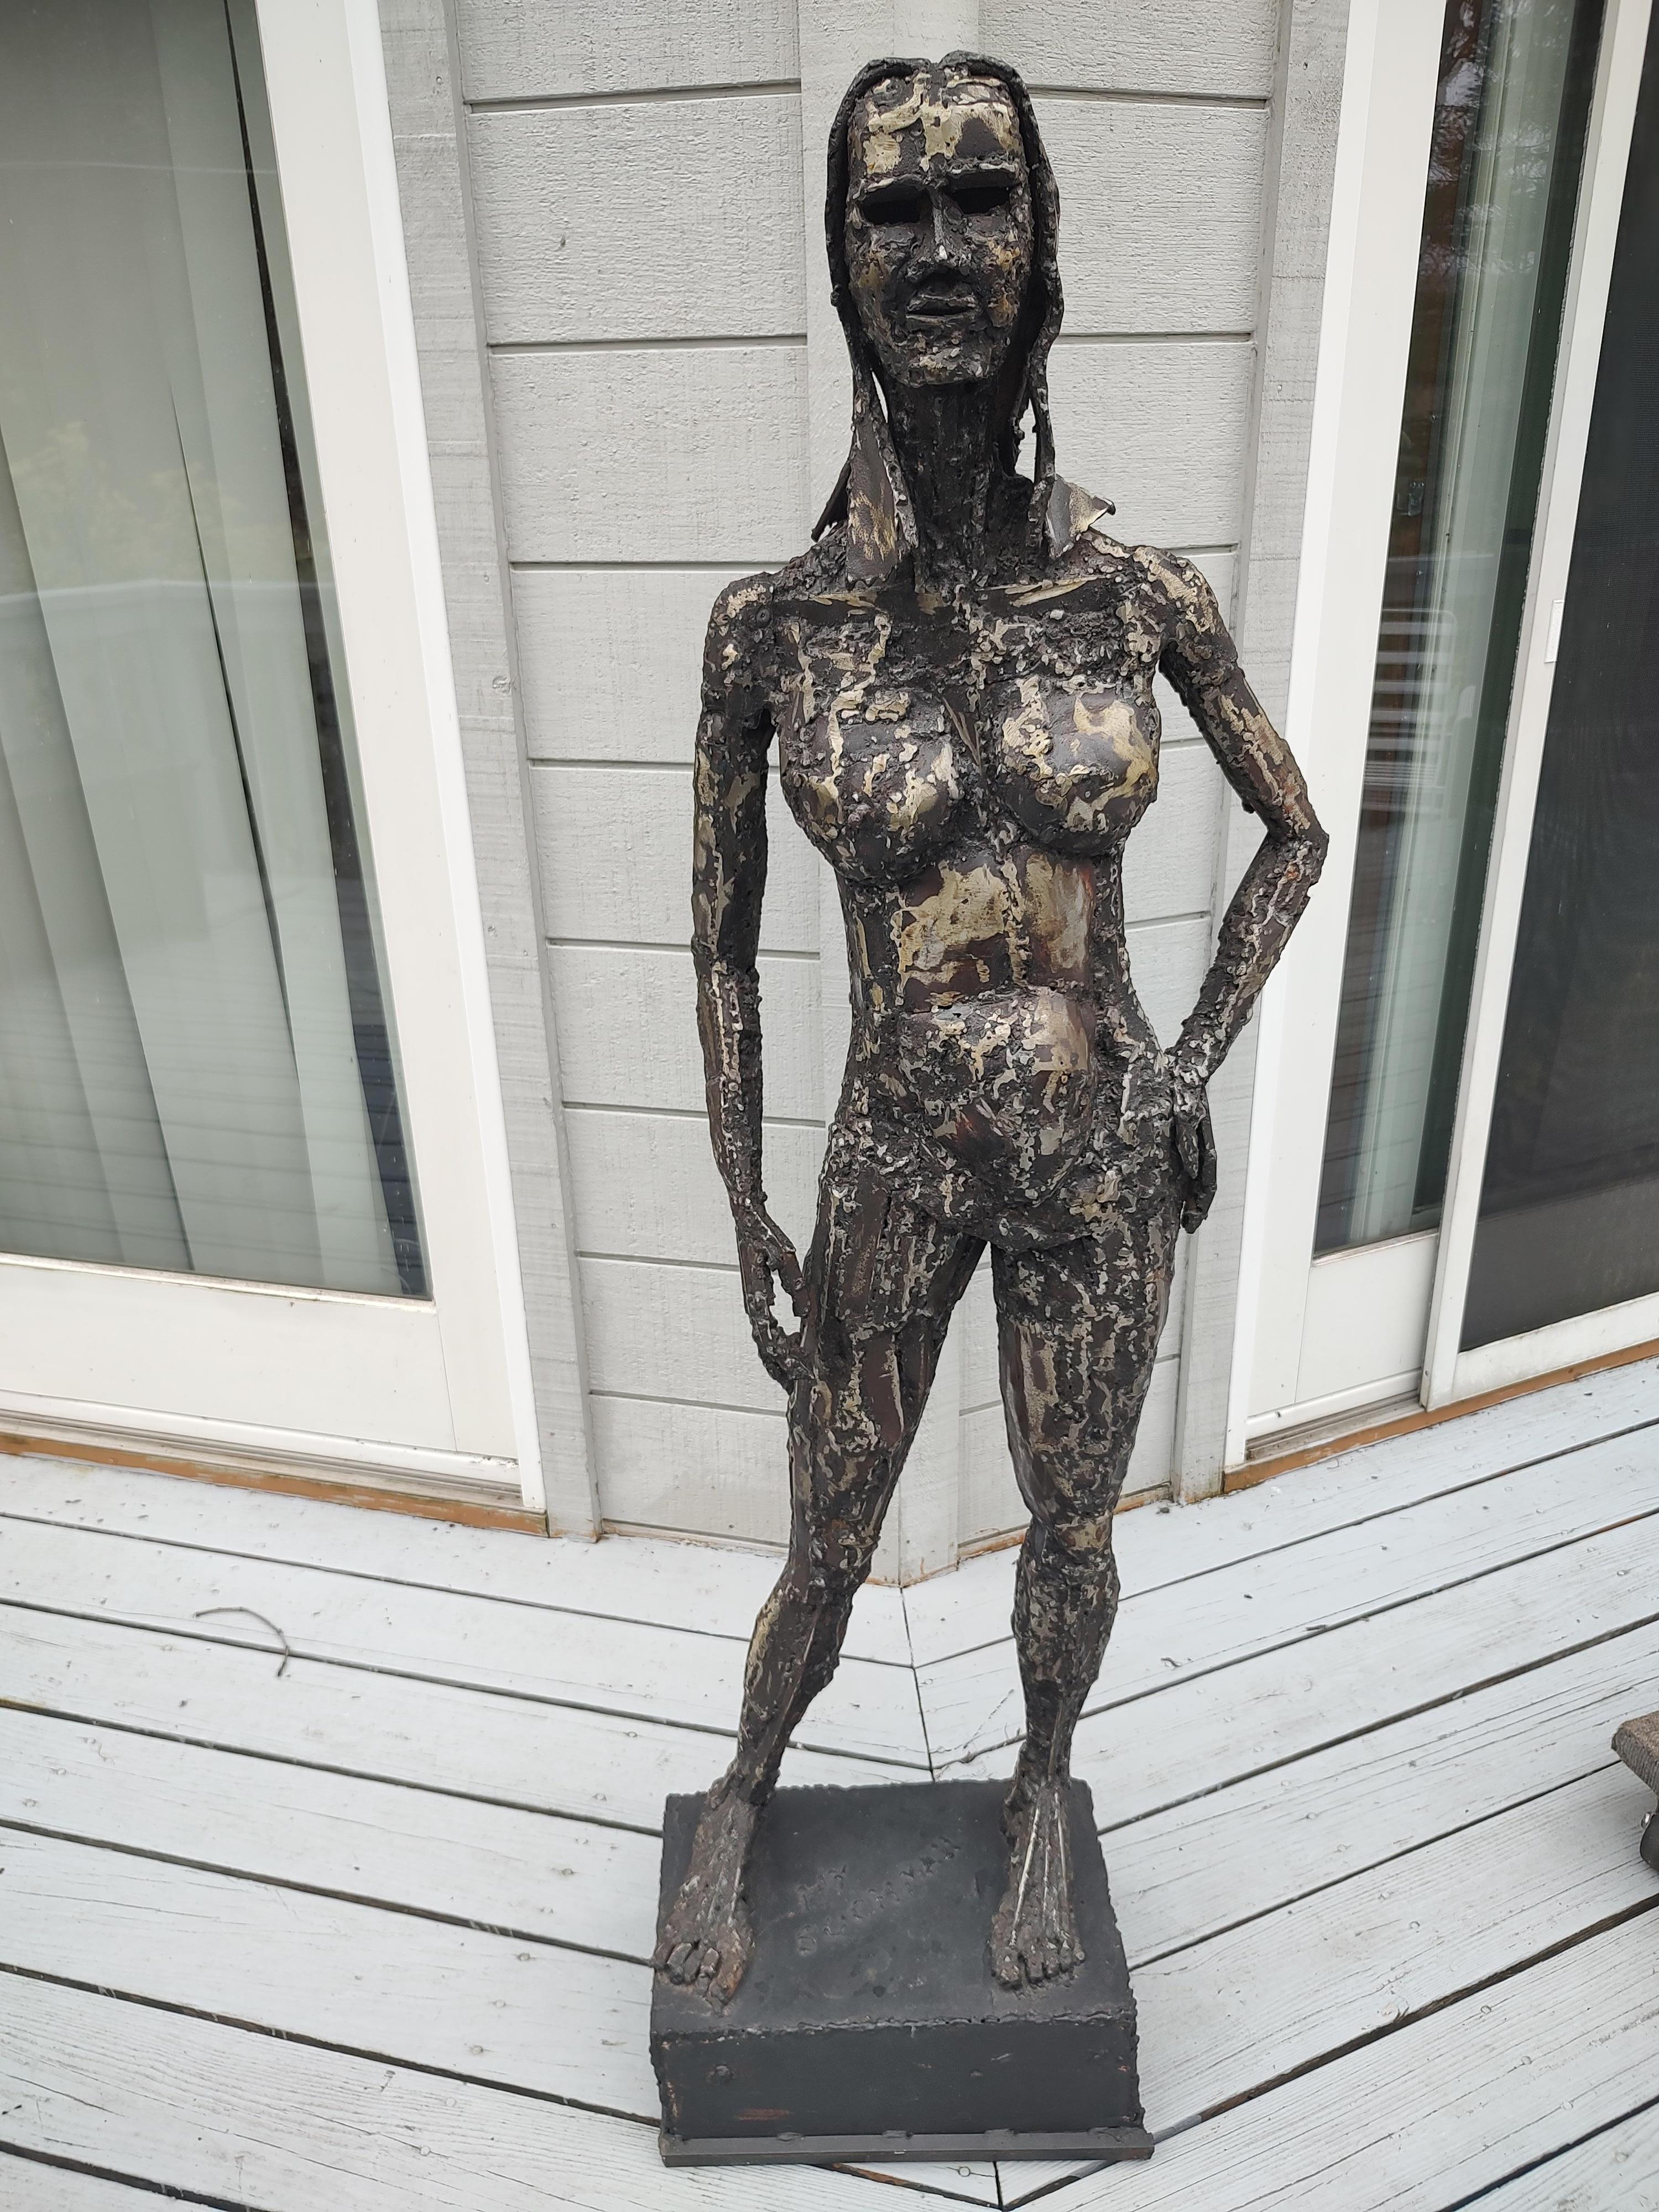 Fantastic steel & iron figurative sculpture of a lifesize nude woman created by artist Hy Suchman.  Sculpture is approximately 5ft 2 inches tall with a width and depth of 24 X 20. Amazing Sculptural details in the Brutalist style of the late sixties